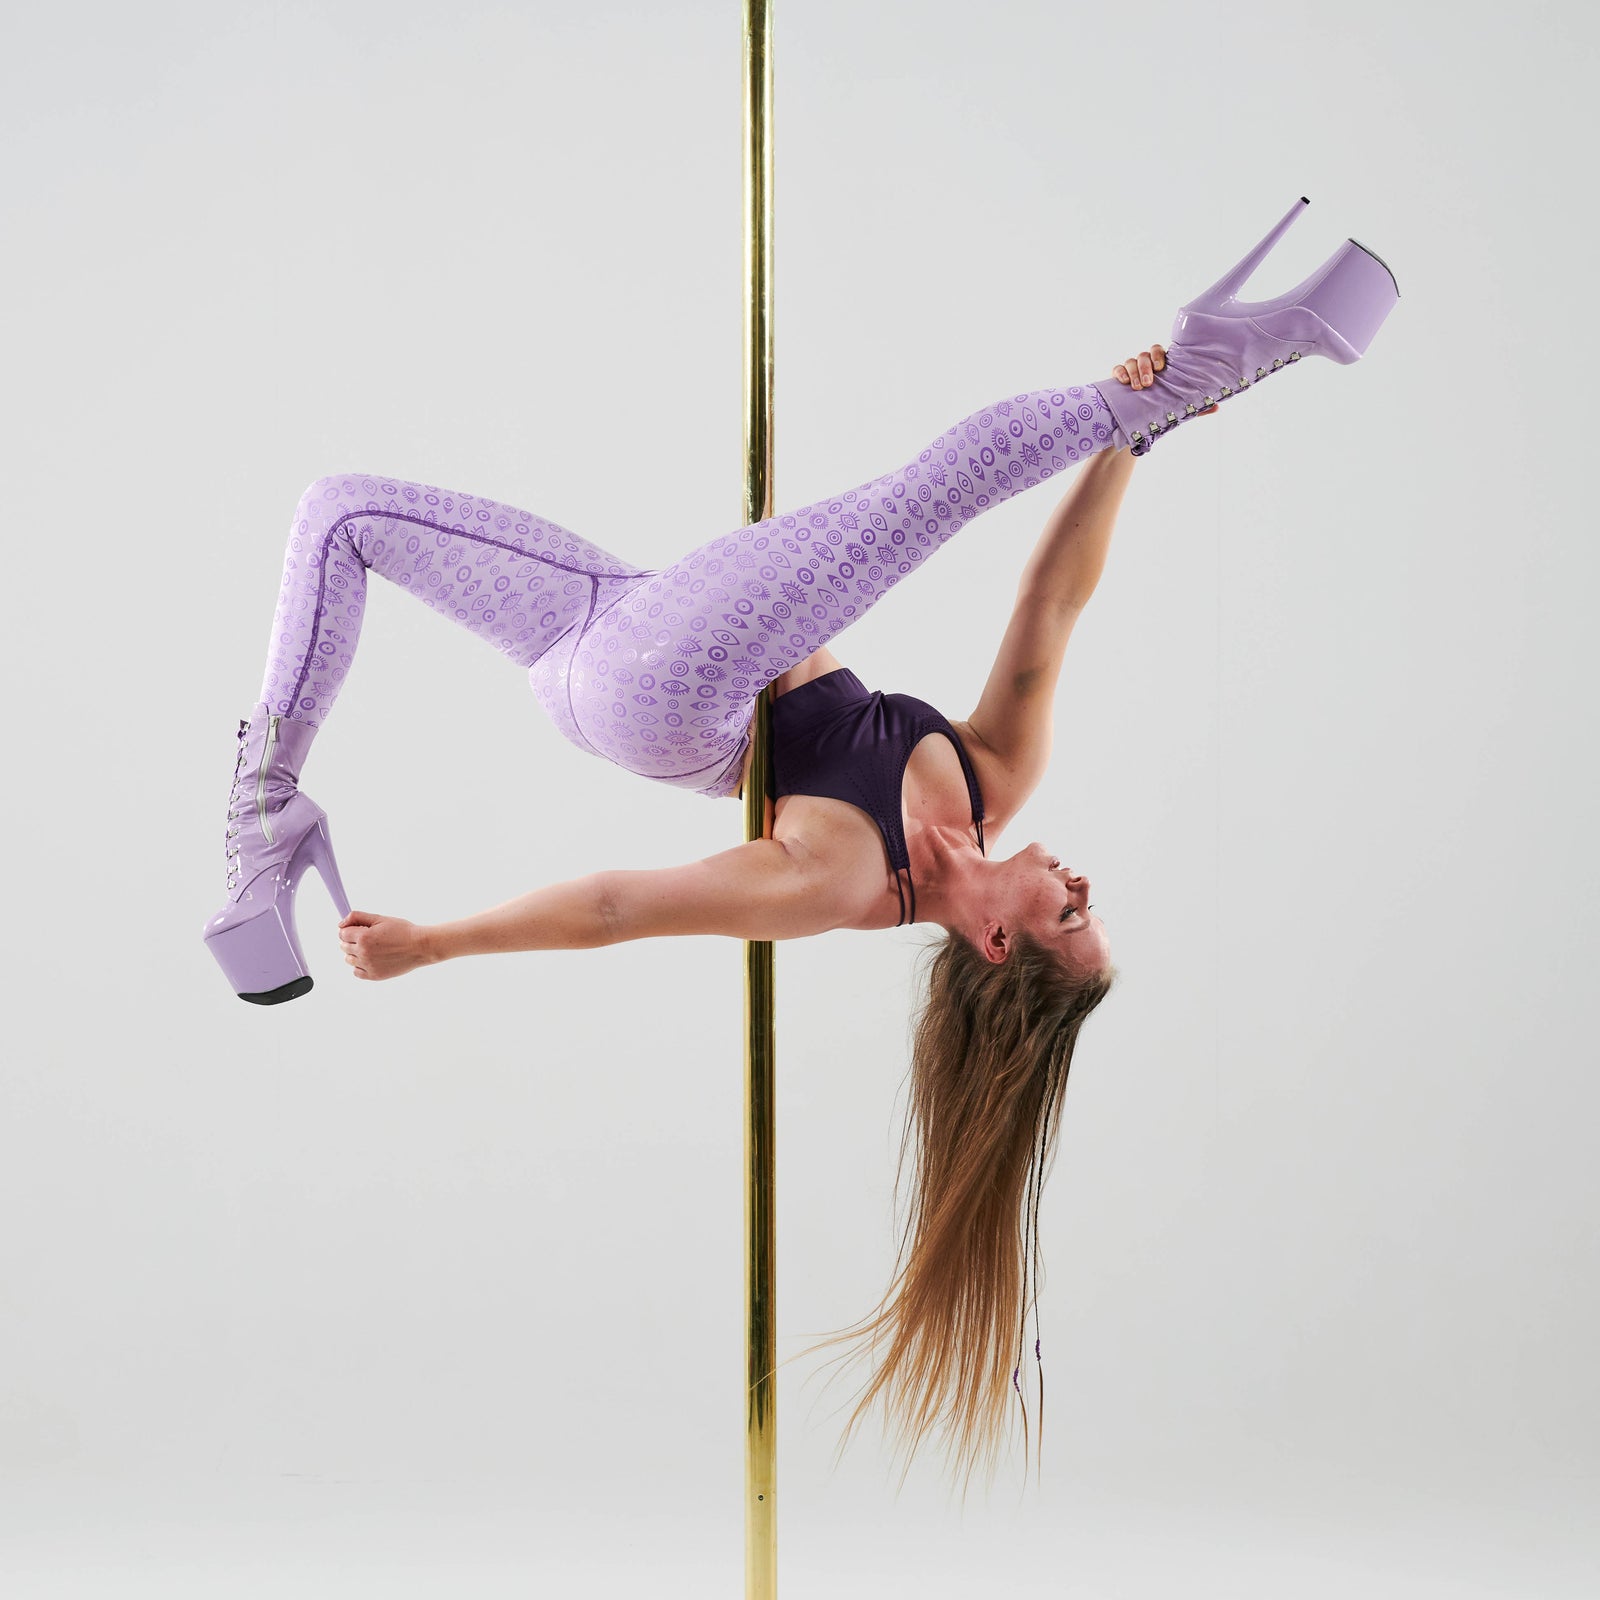 6 Tips to Create a Pole Dance Competition Video - Super Fly Honey Sticky  Pole Wear